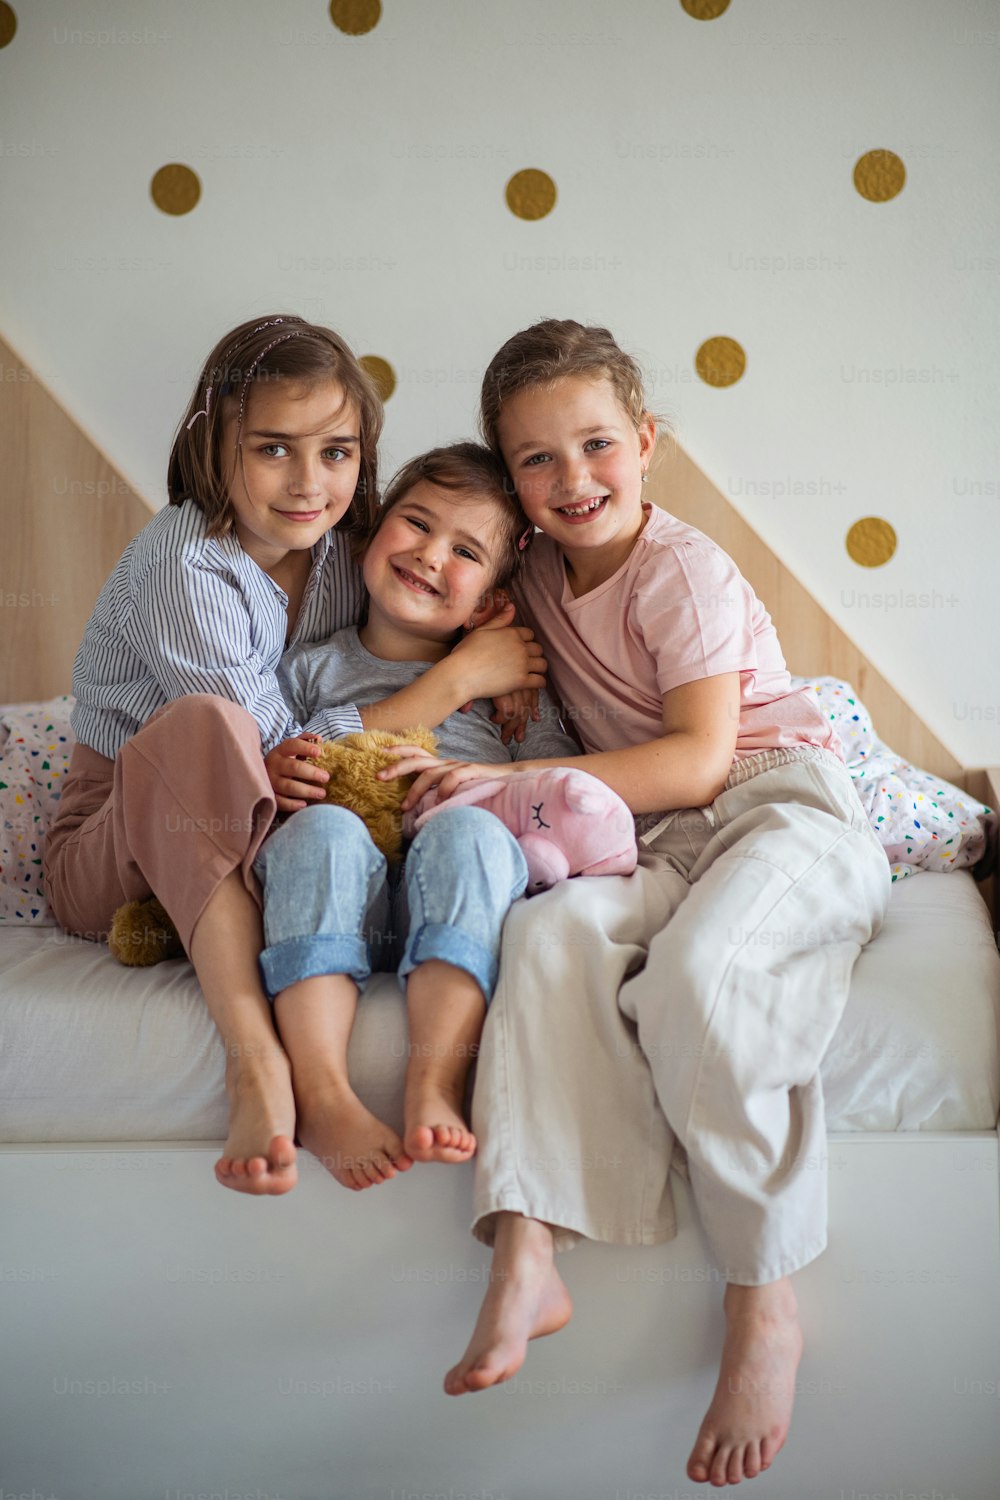 A portrait of three girls sisters indoors at home, looking at camera.